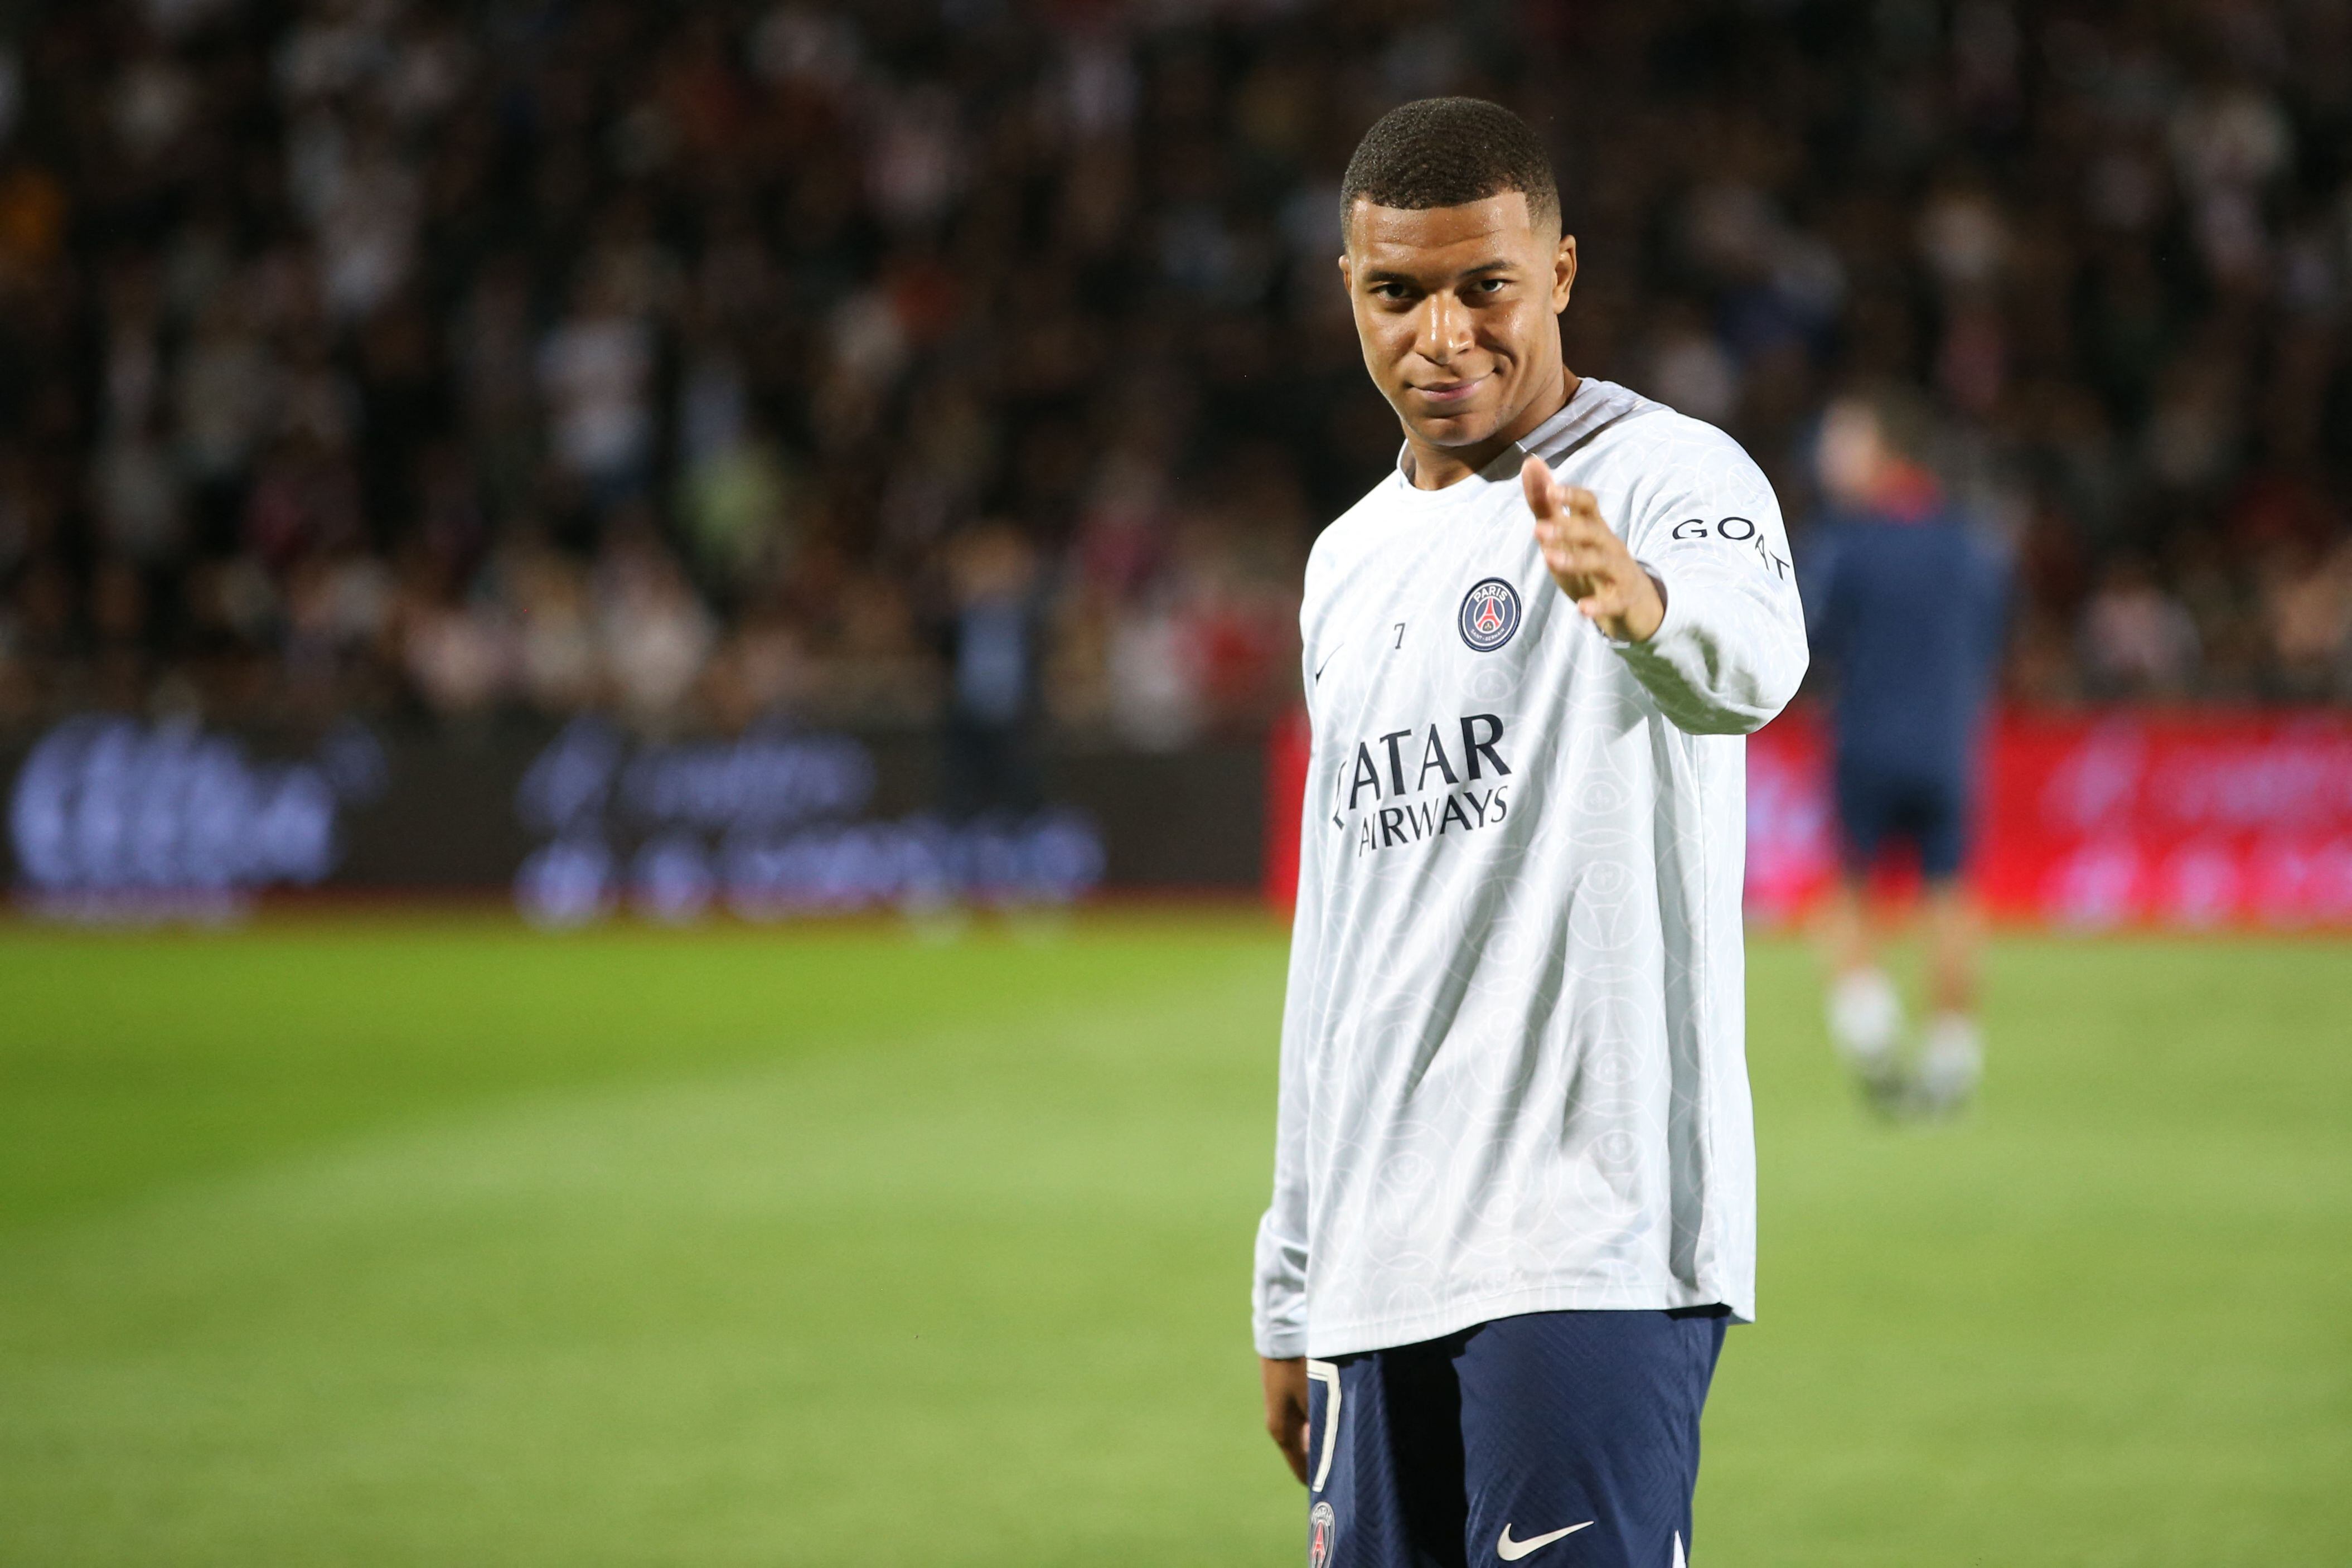 Paris Saint-Germain's French forward Kylian Mbappe gestures prior to the French L1 football match between AC Ajaccio and Paris Saint-Germain (PSG) at the Francois Coty Stadium in Ajaccio, Corsica, on October 21, 2022. (Photo by Pascal POCHARD-CASABIANCA / AFP)